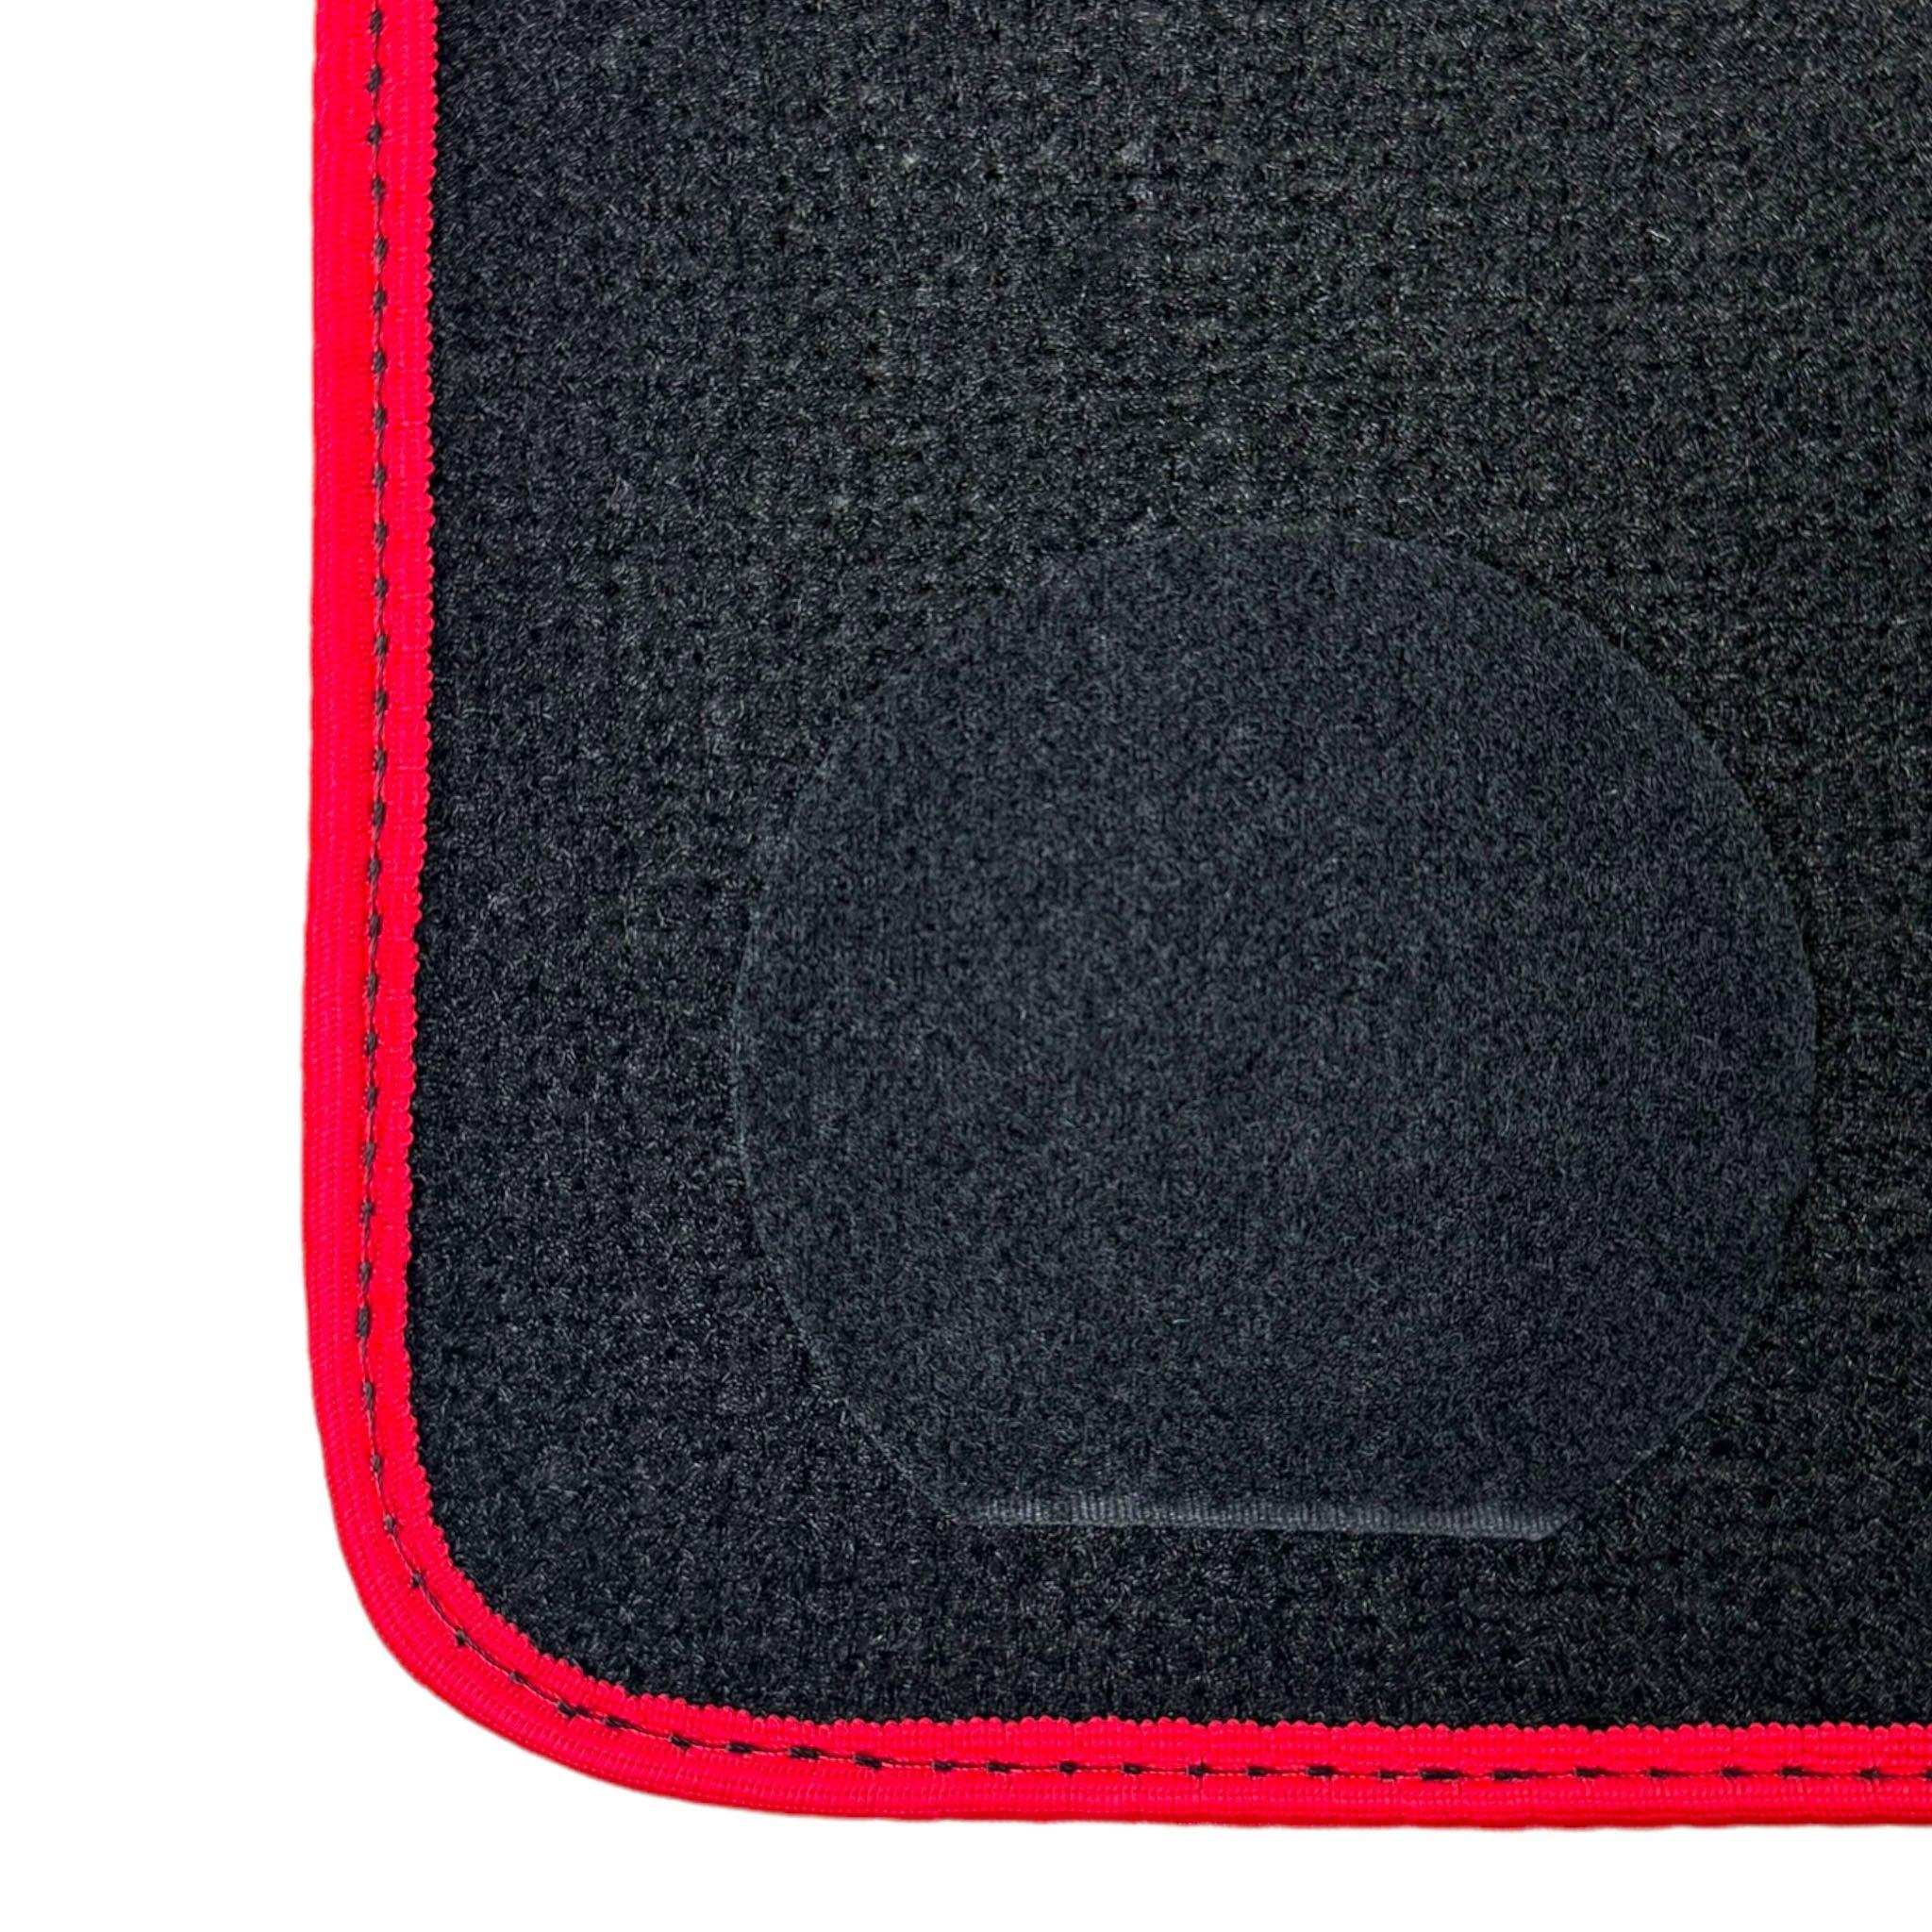 Black Floor Mats For BMW 5 Series G31 Wagon | Red Trim